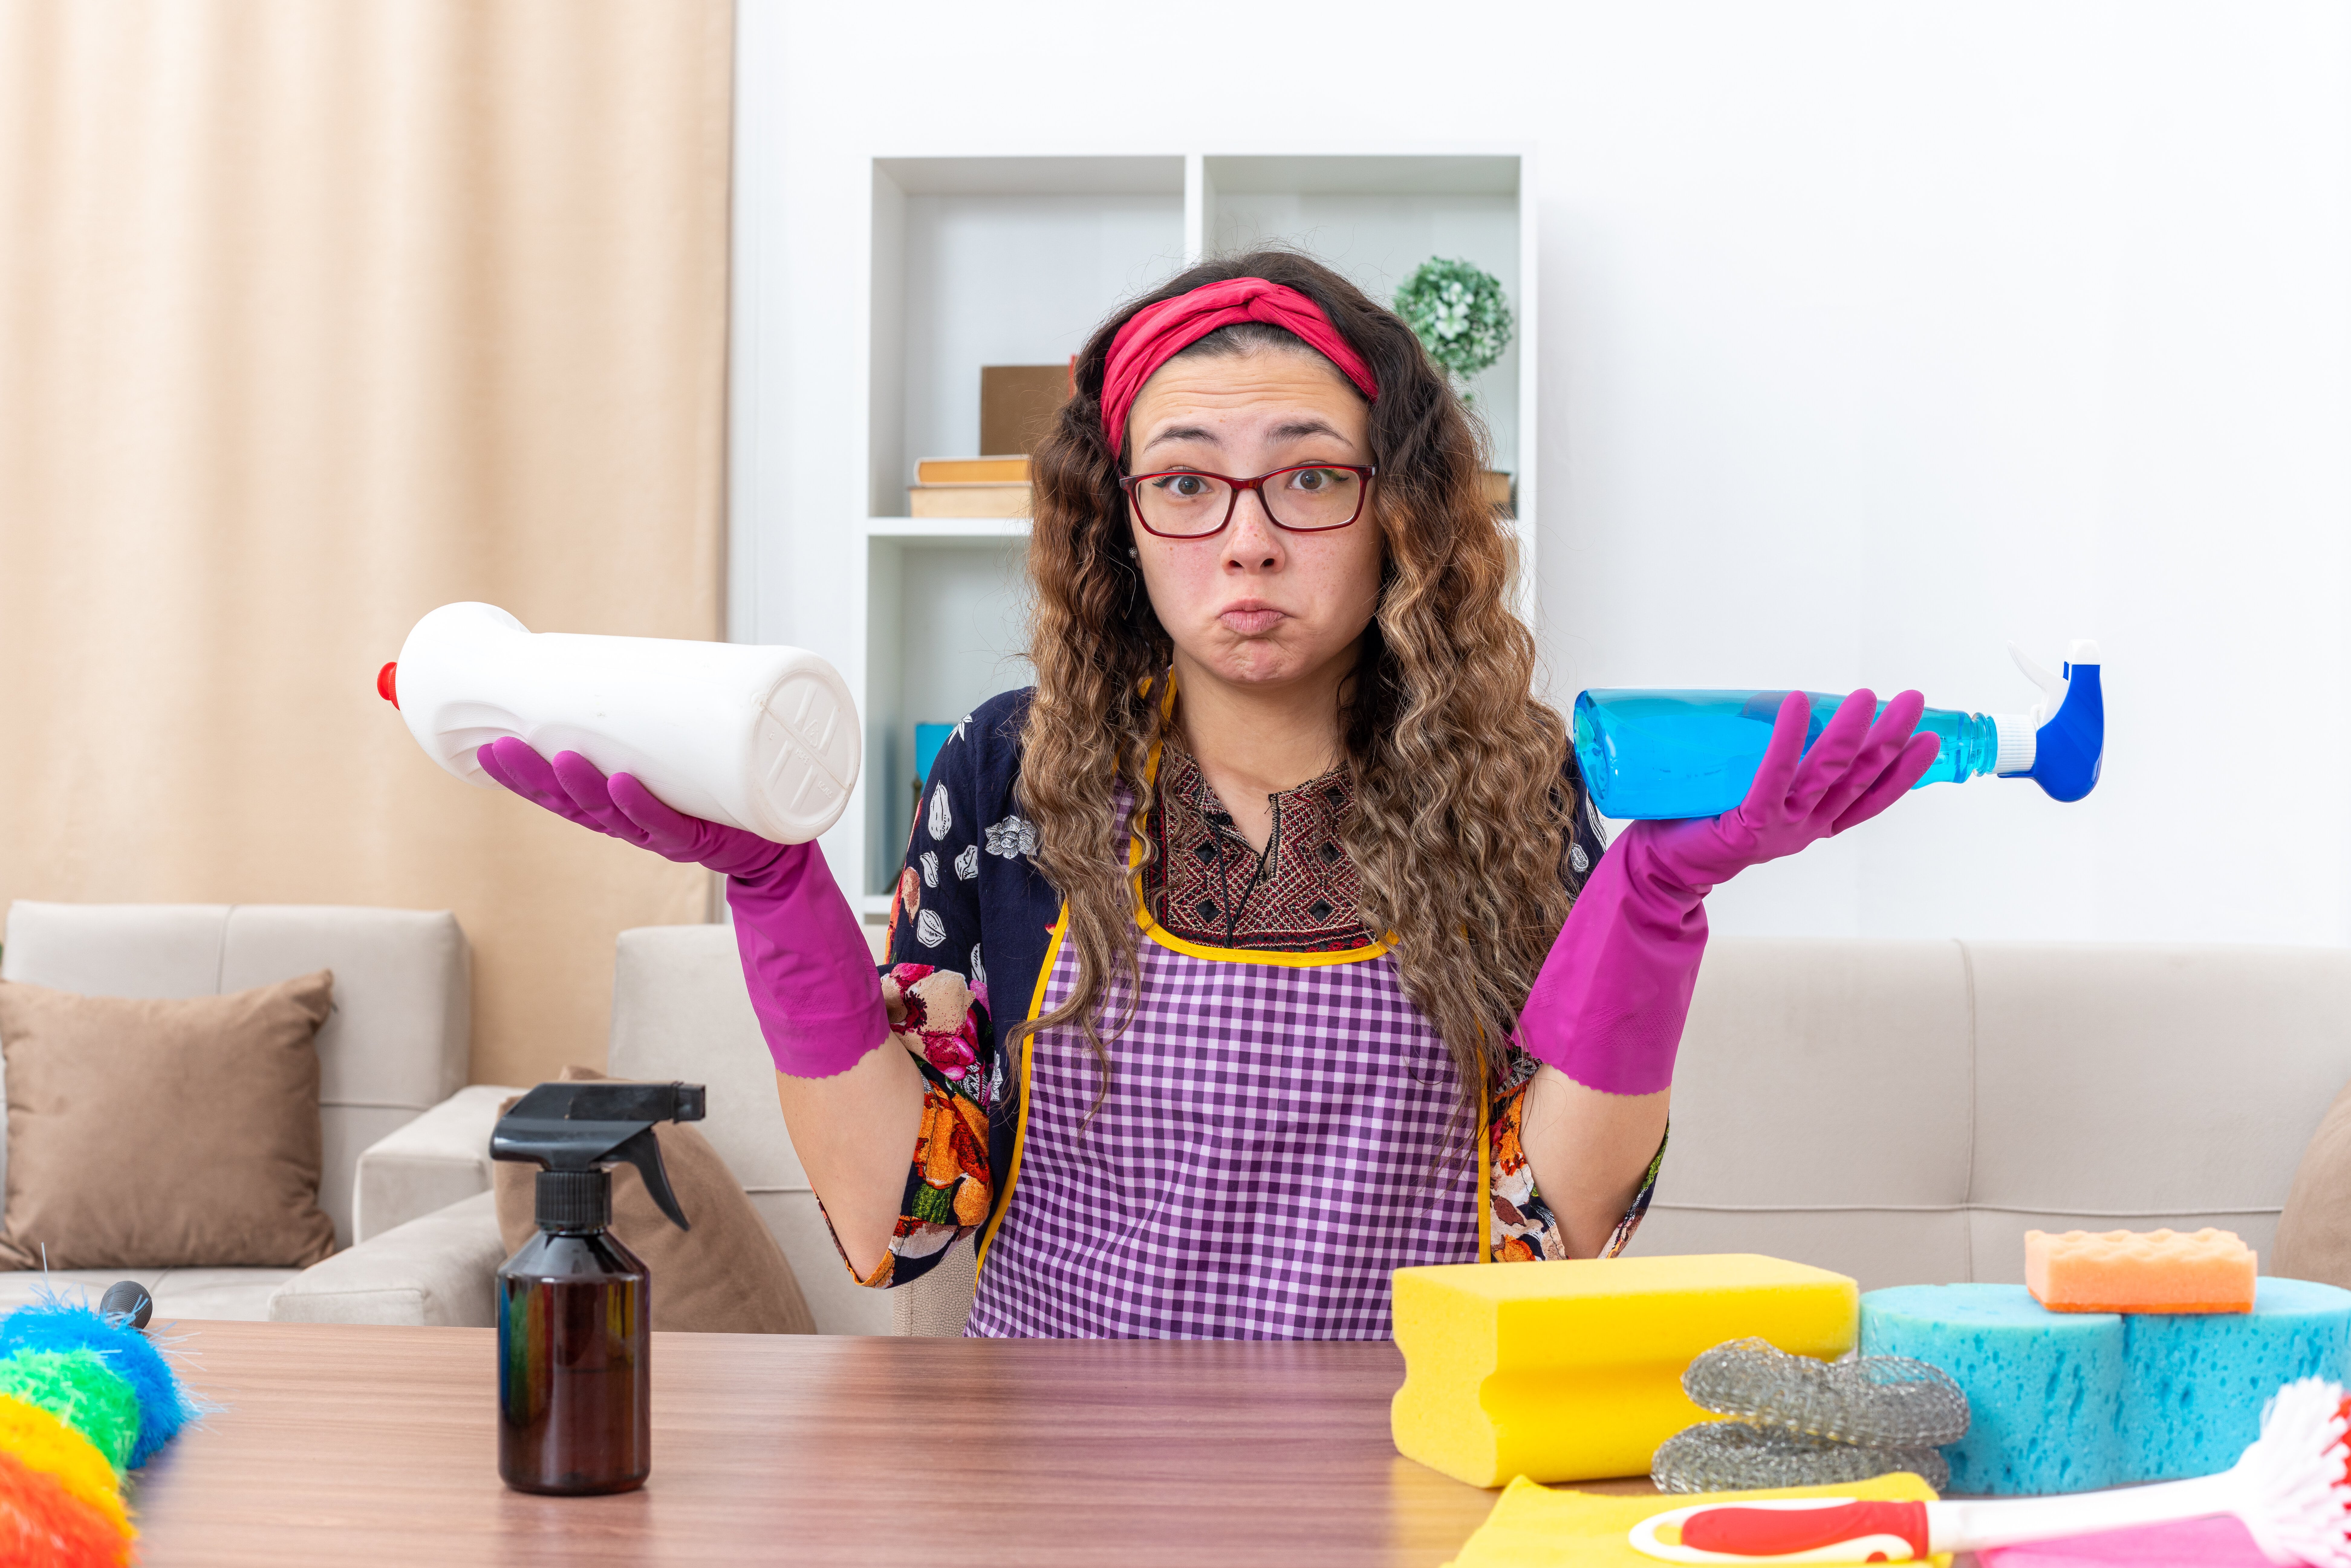 7 Tips for Choosing the Right Professional Home Cleaning Service